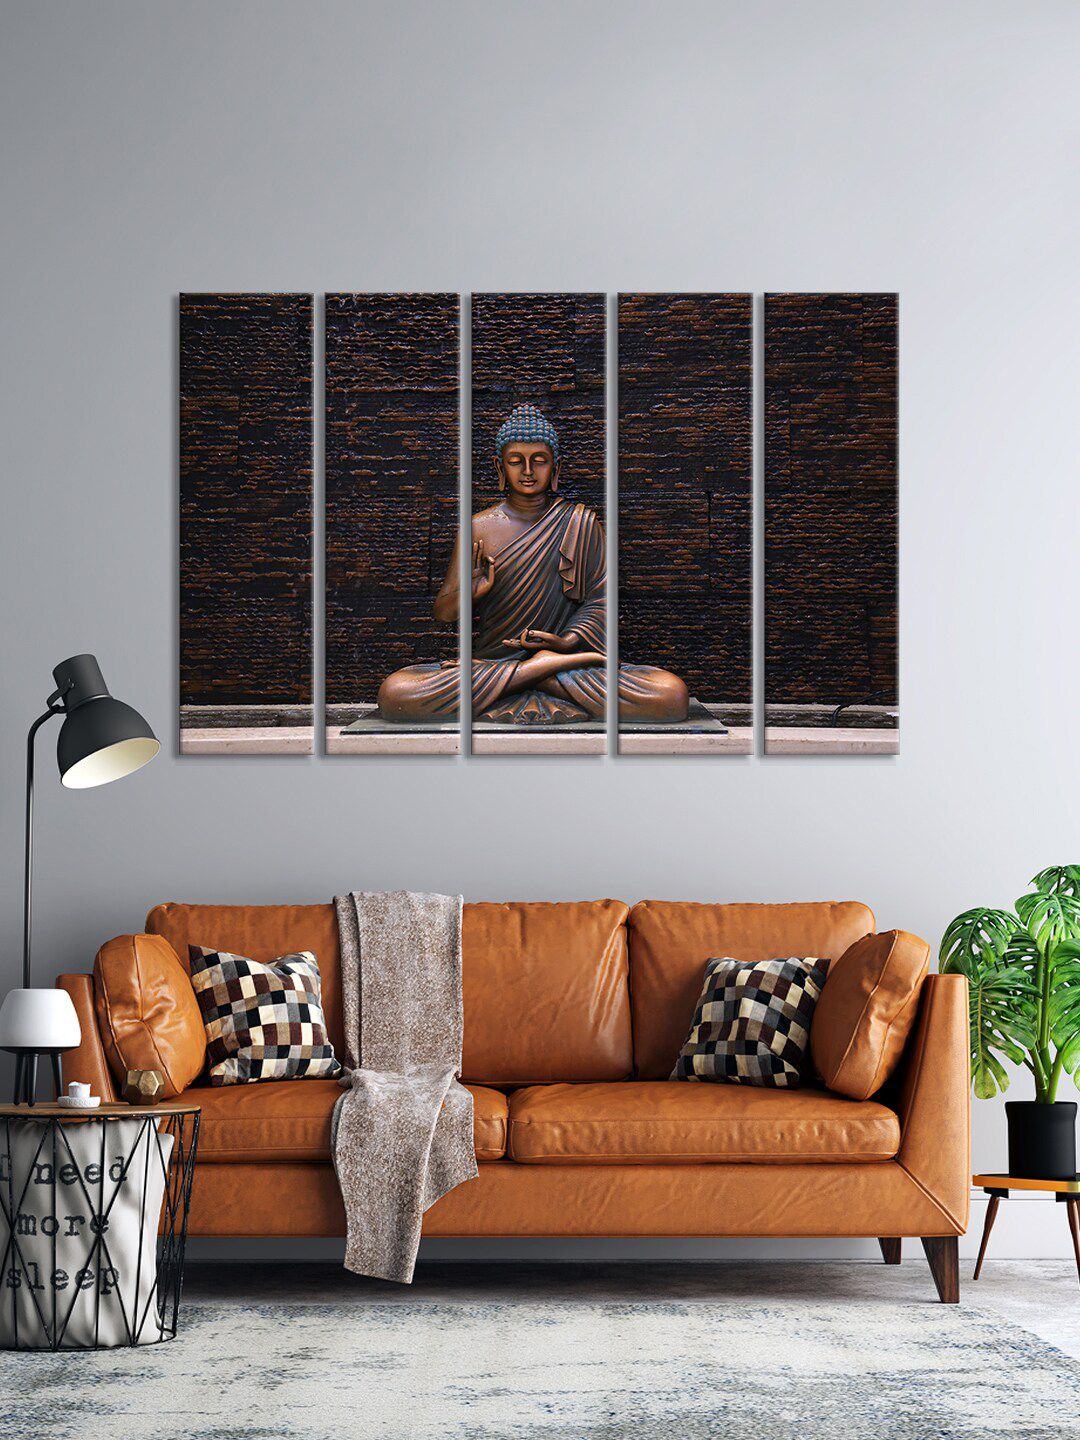 999Store Set Of 5 Brown & Copper-Coloured Buddha Wall Art Frames Price in India